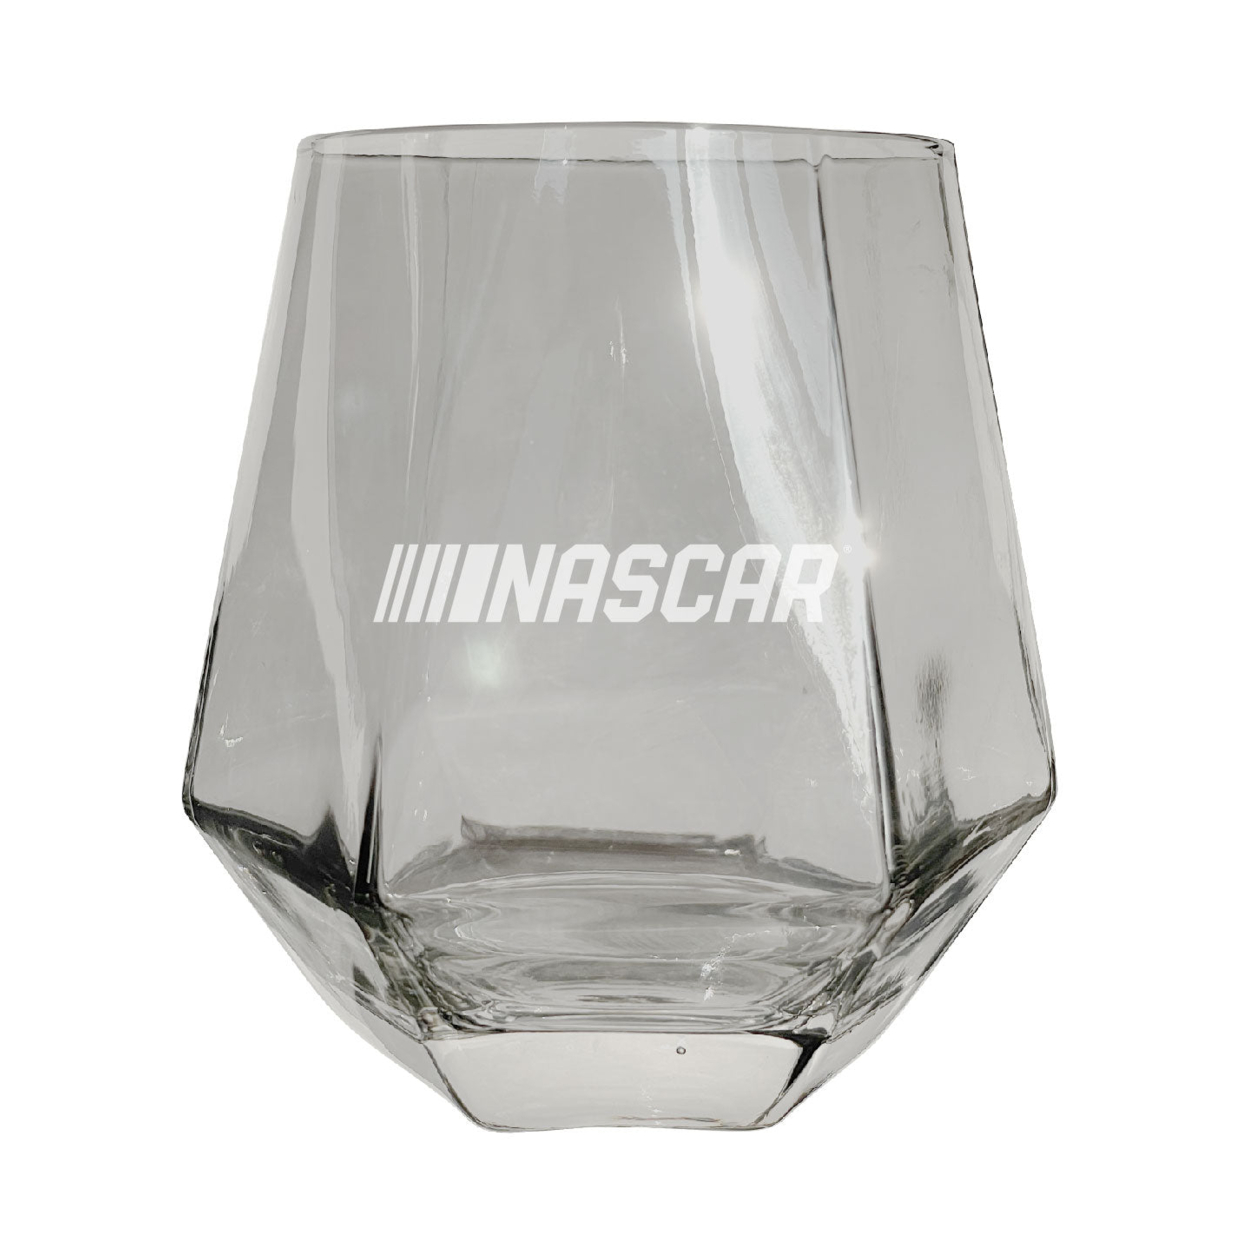 NASCAR Officially Licensed 10 Oz Engraved Diamond Wine Glass - Clear, Single